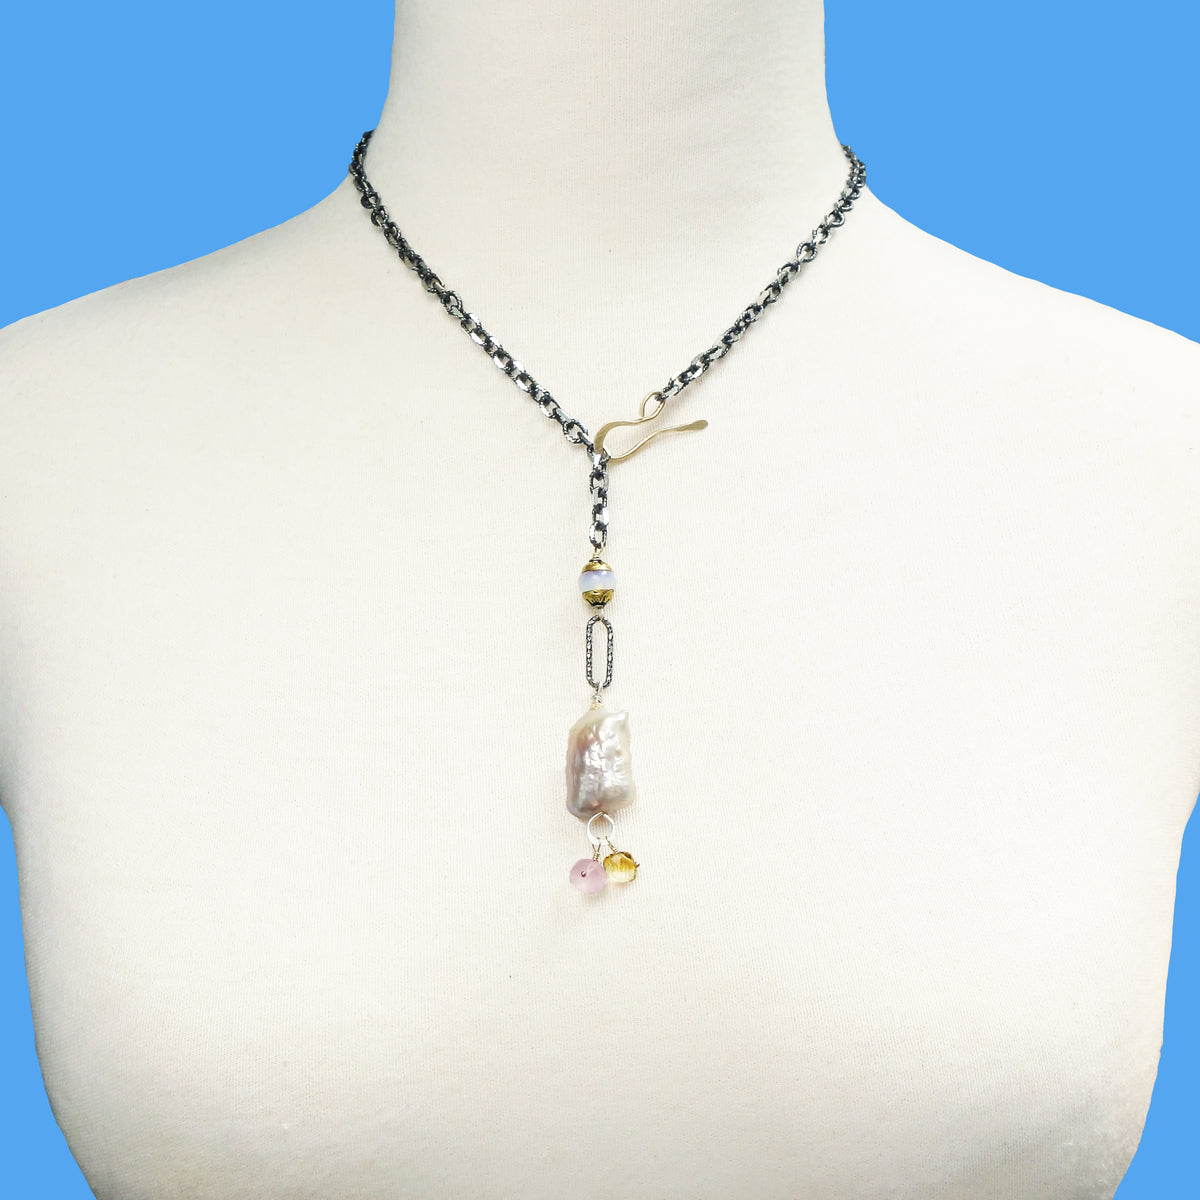 Her Blush Spoke a Thousand Words: pink mabe pearl, silver + gold necklace